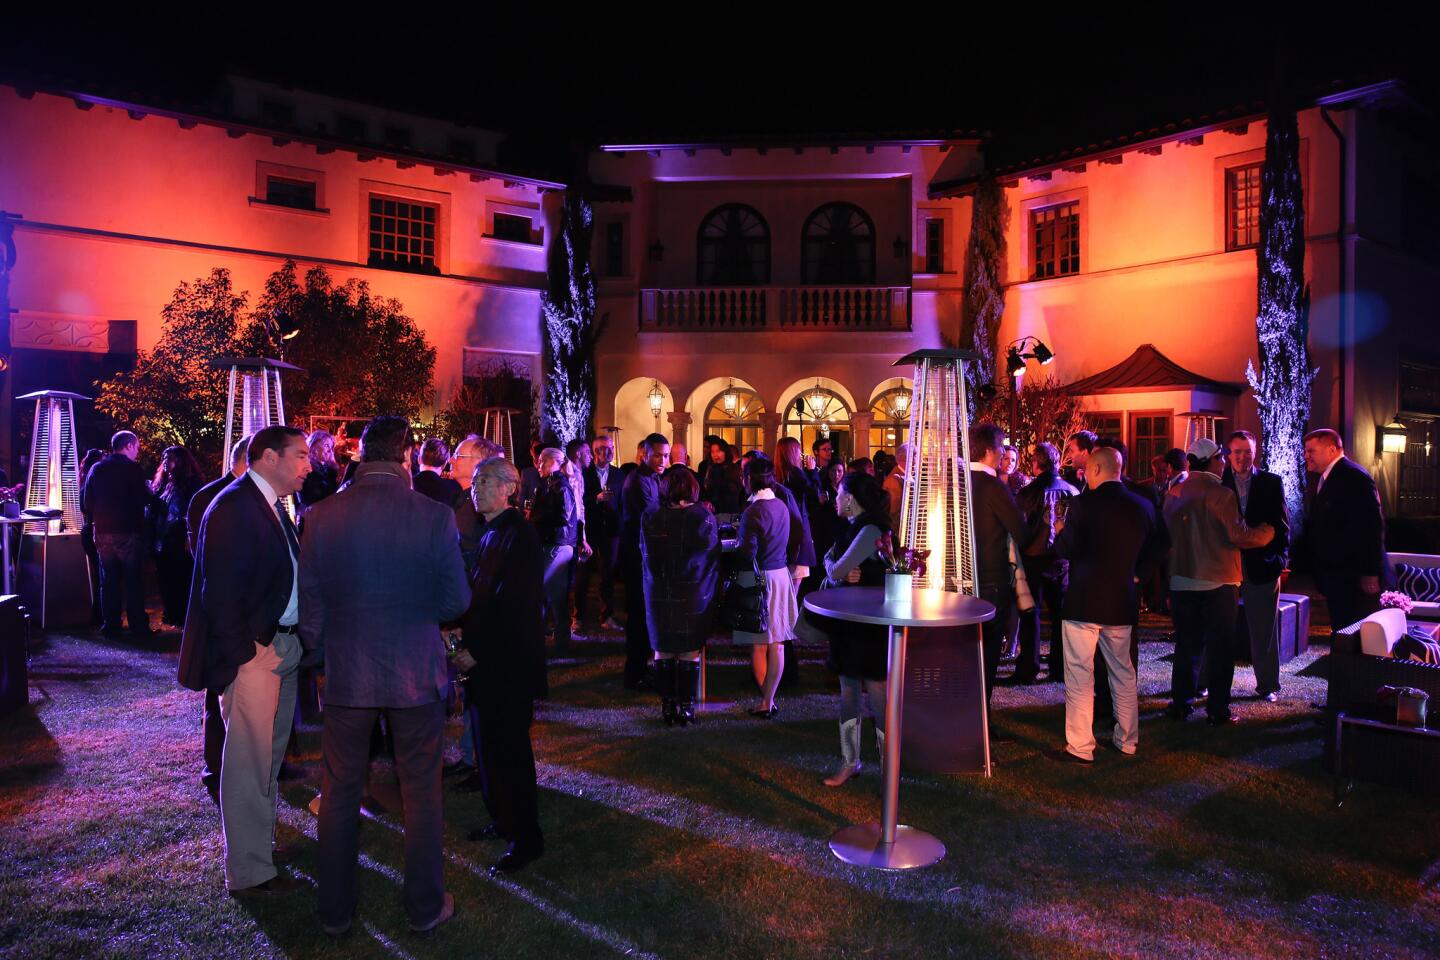 The Range Rover LWB Autobiography Black made its global debut at an exclusive reception in Beverly Hills for a selective group of owners on November 18, 2013 in Beverly Hills.